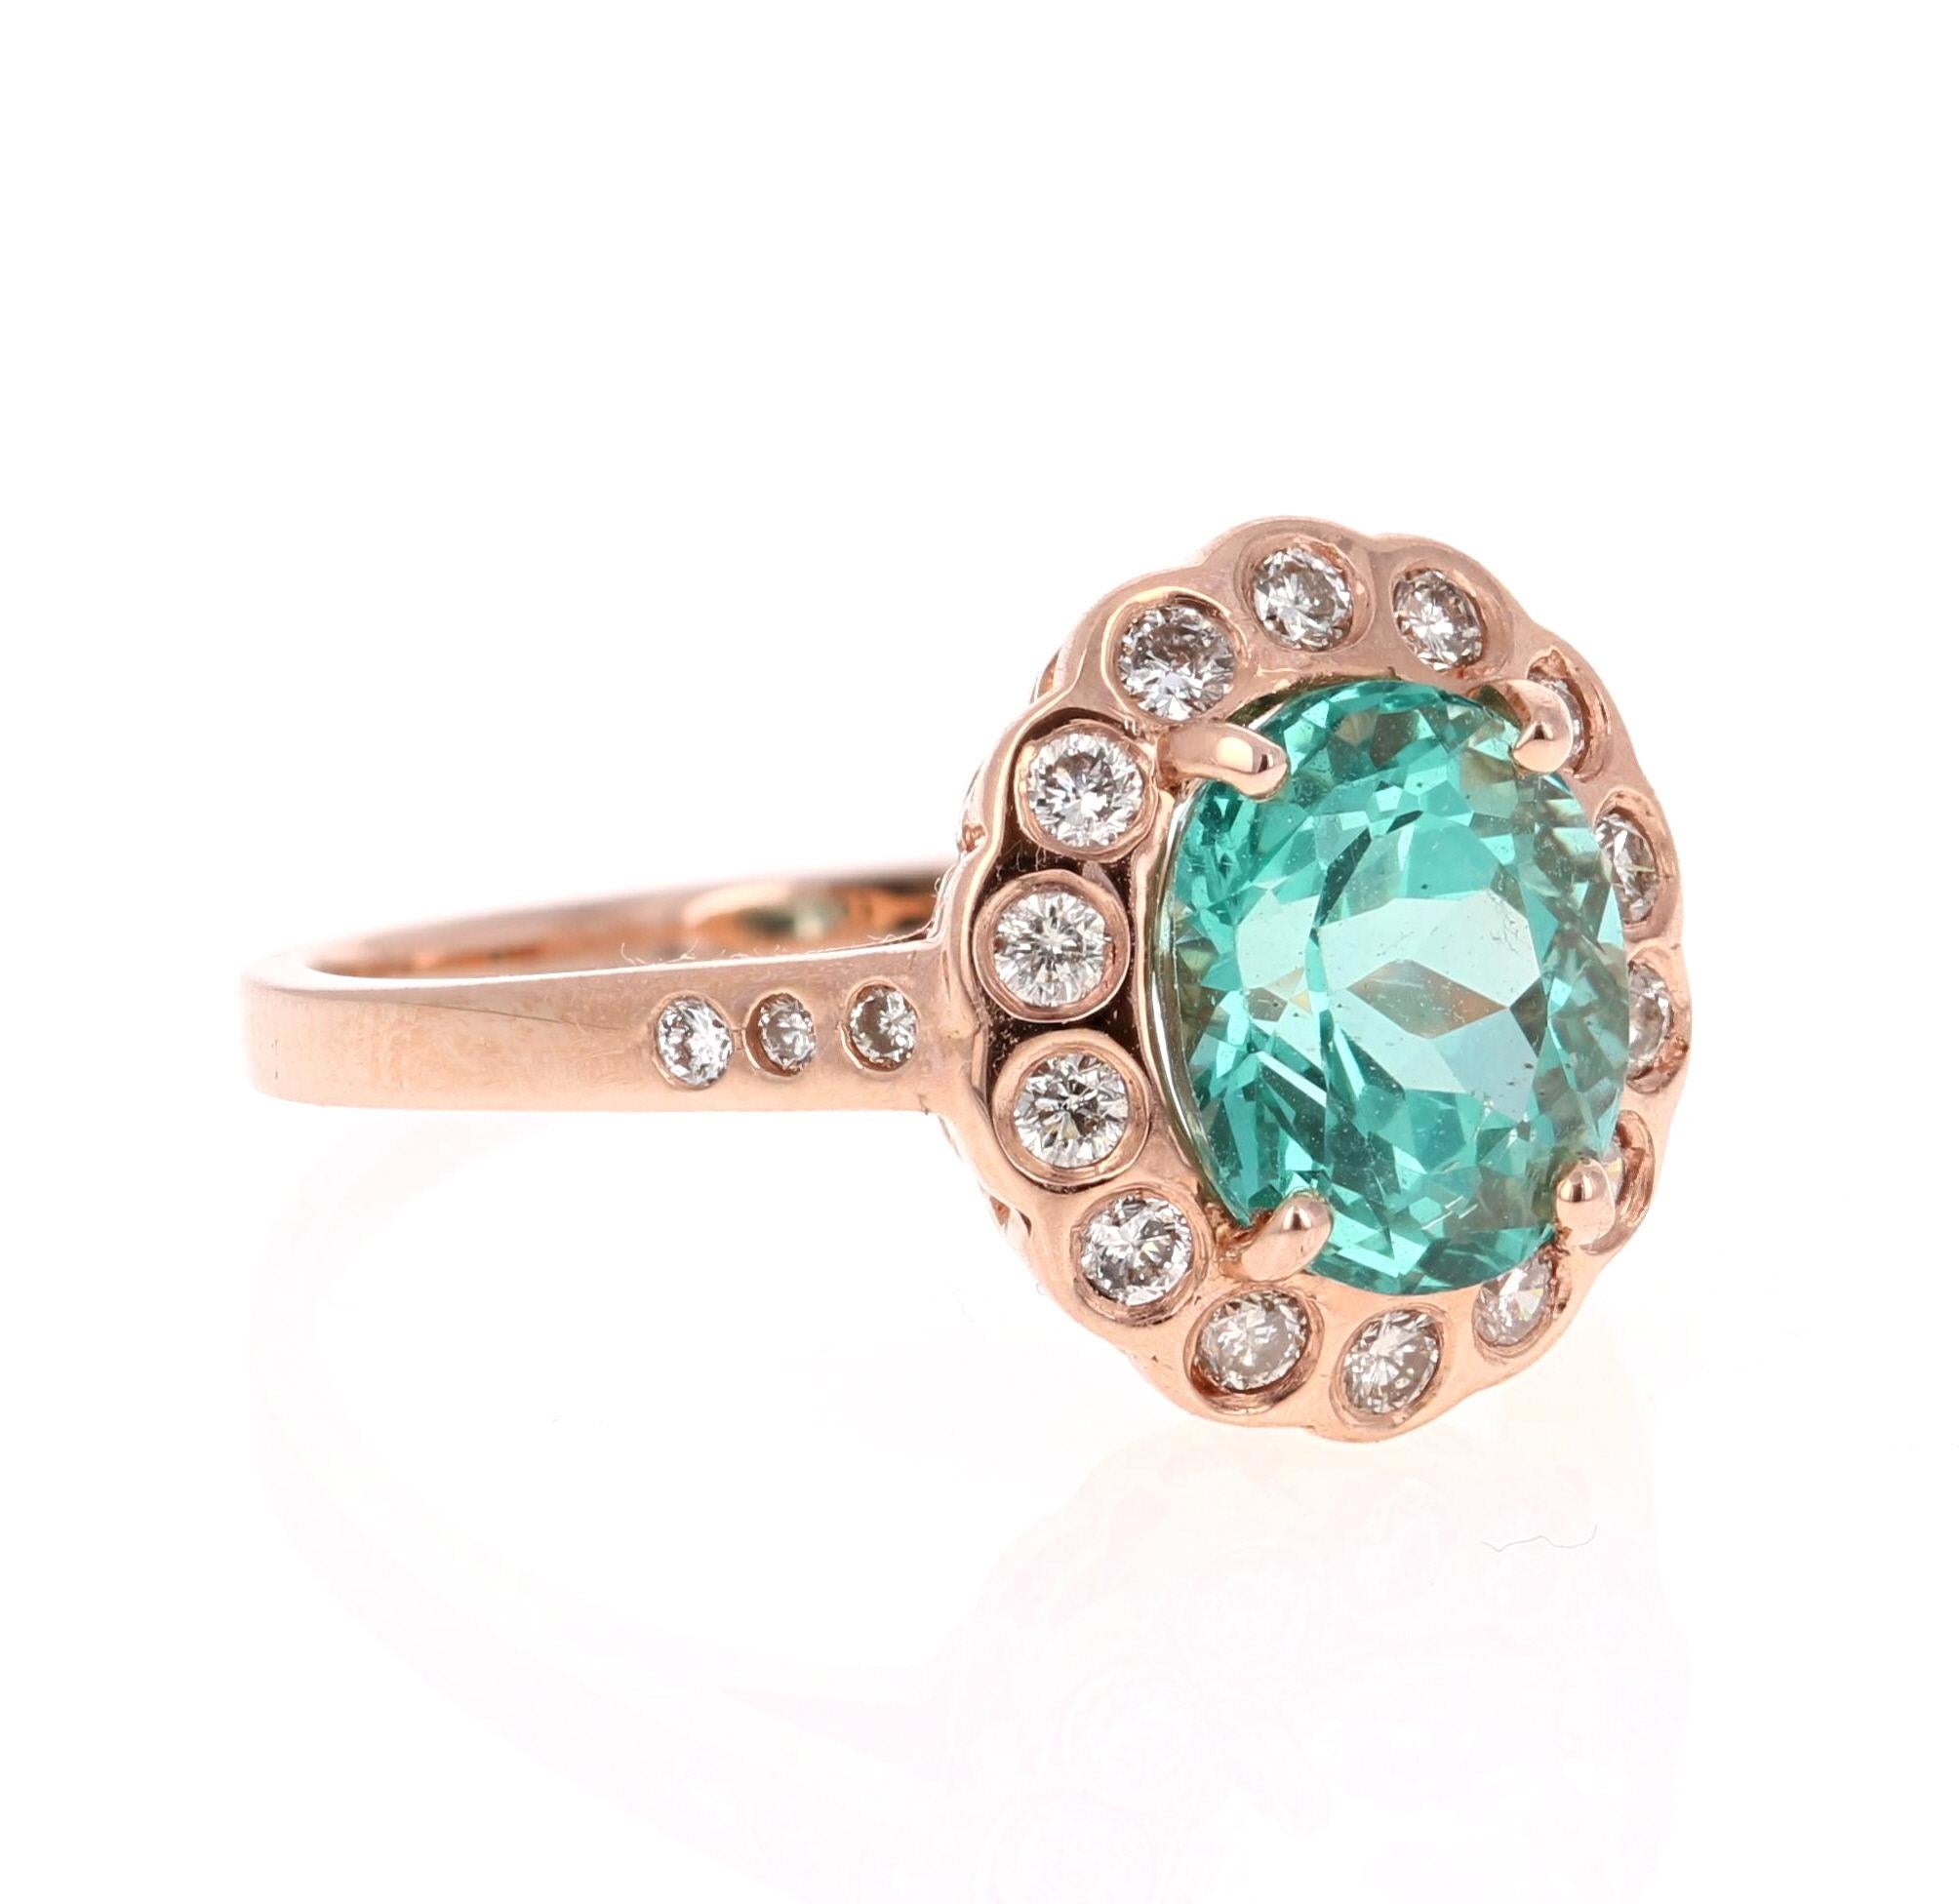 An Apatite Ring set beautifully in Rose Gold - such a beautiful and unique combination!!

This stunning Apatite and Diamond Ring can easily transform into a unique and classy engagement ring for your special someone!  The ring has a 2.53 Carat Oval